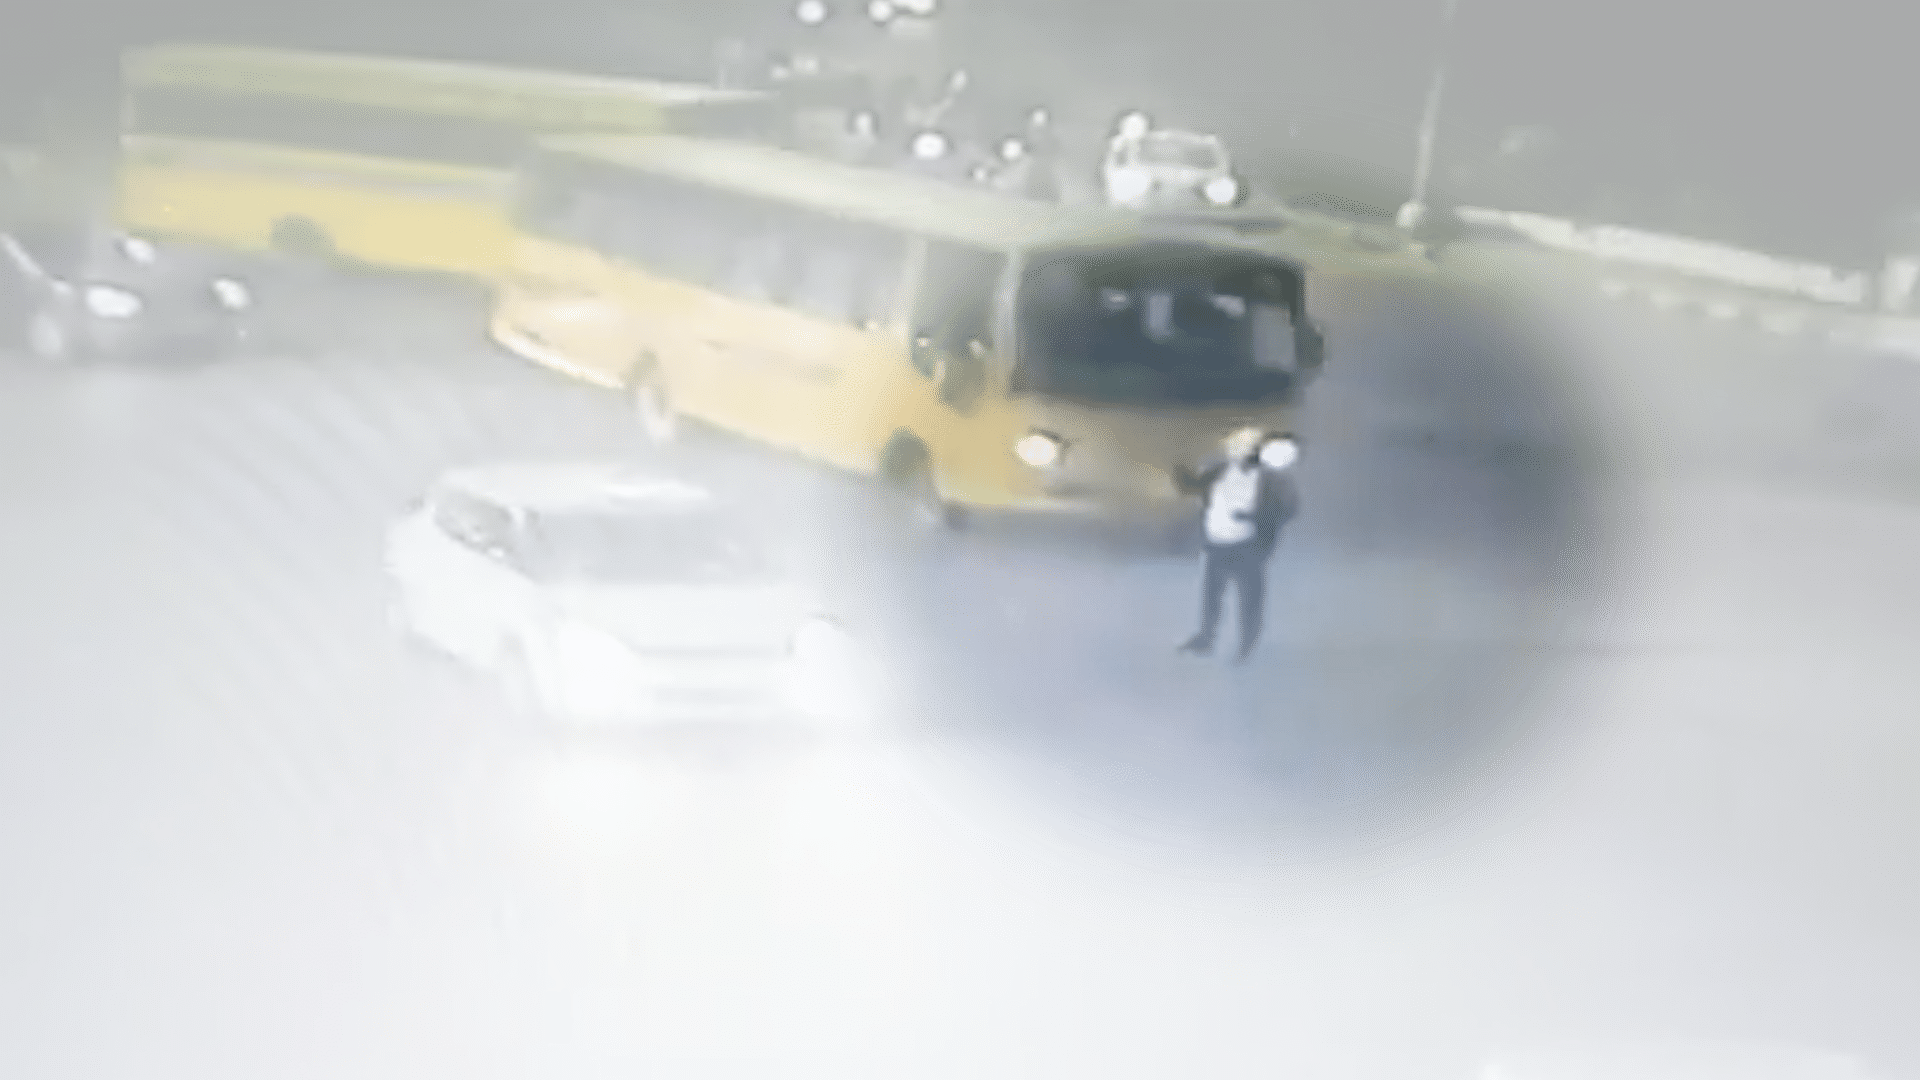 Traffic policeman seen getting hit by a bus in Chandigarh